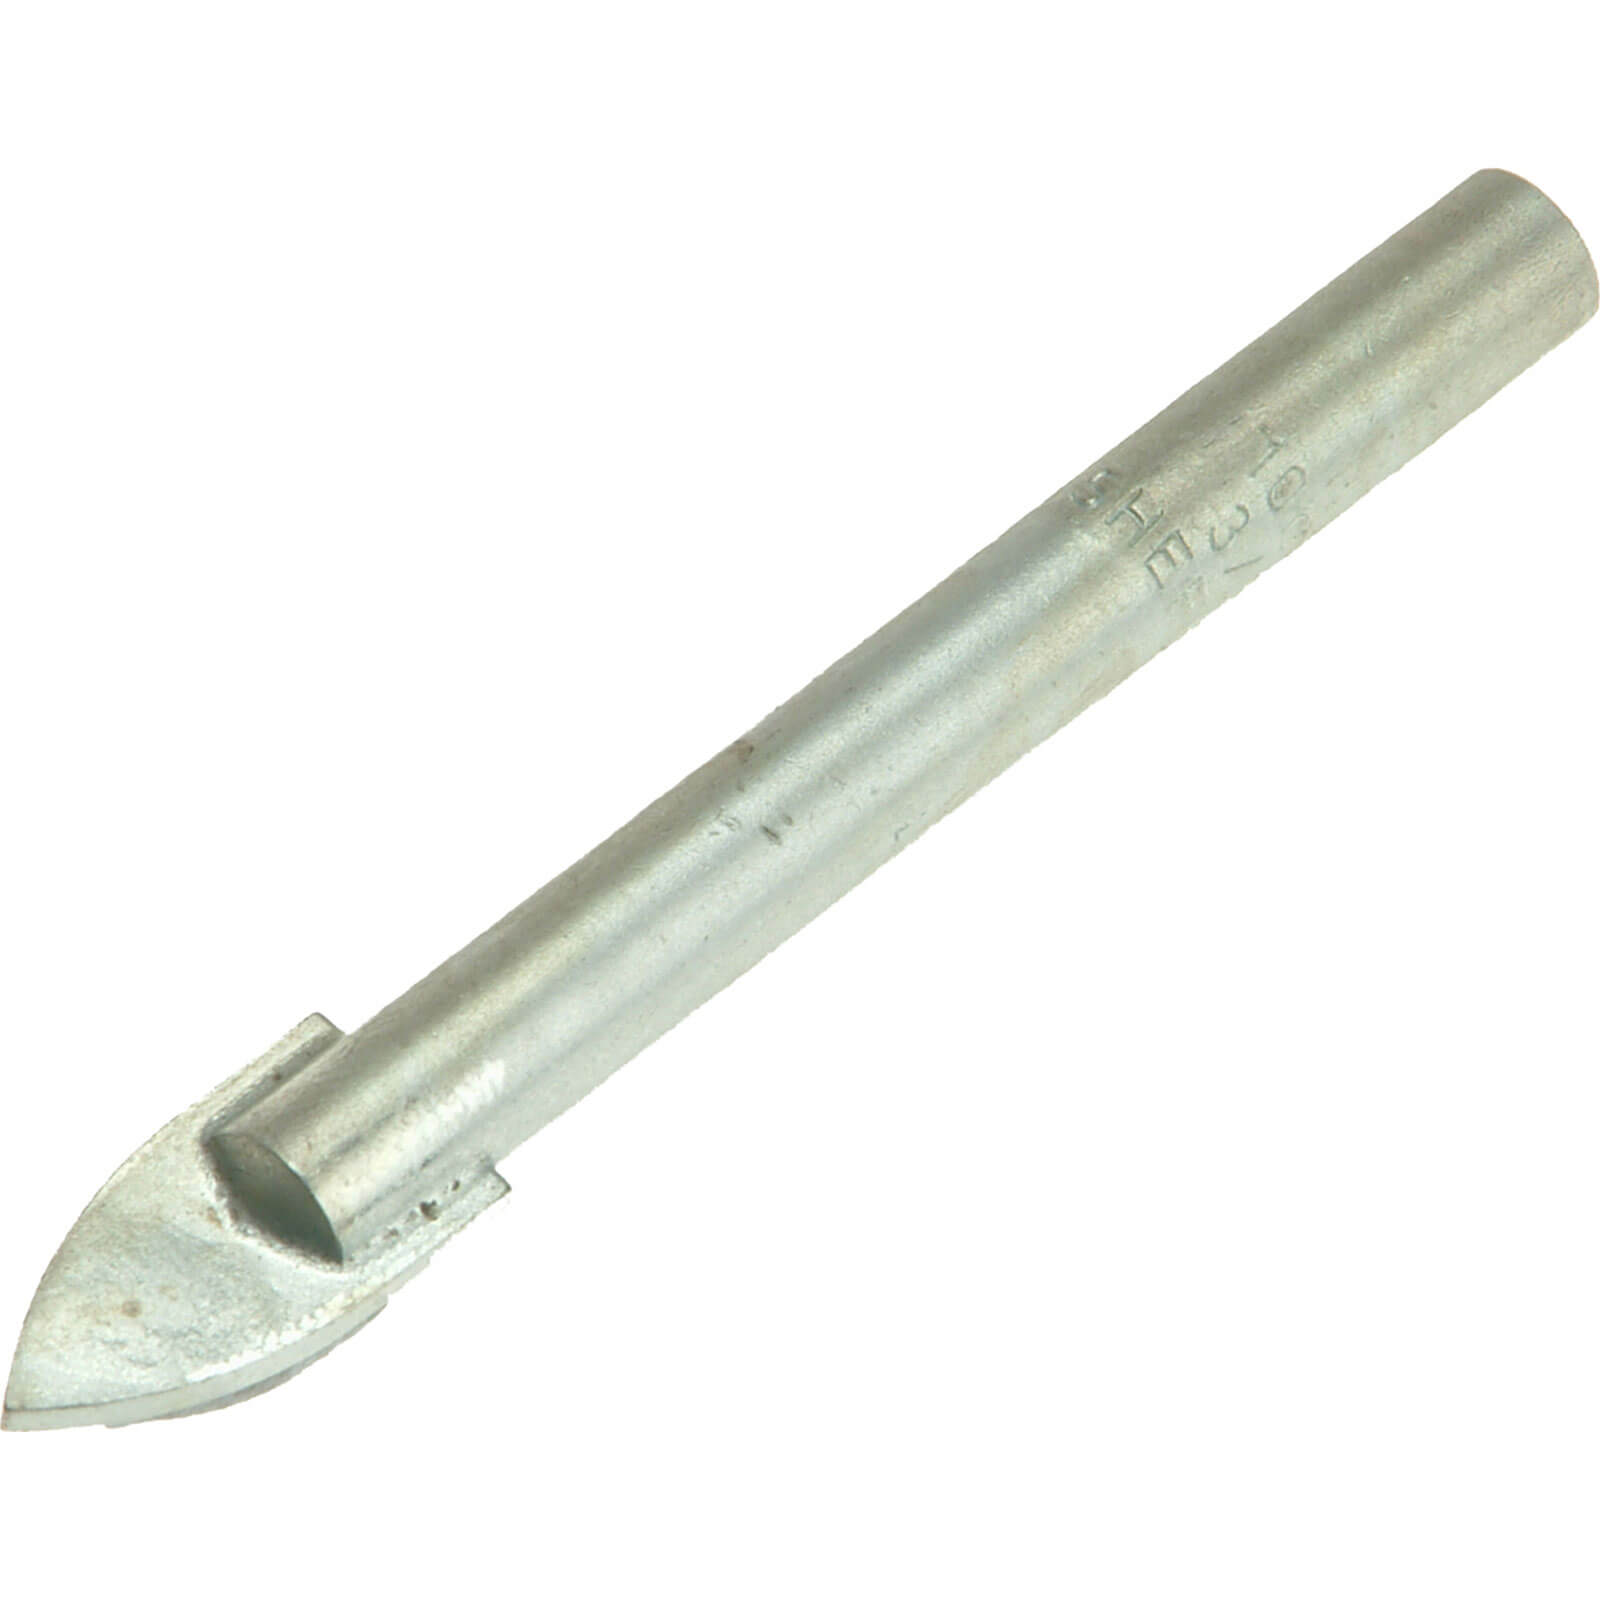 Image of Vitrex TCT Tile and Glass Drill Bit 10mm